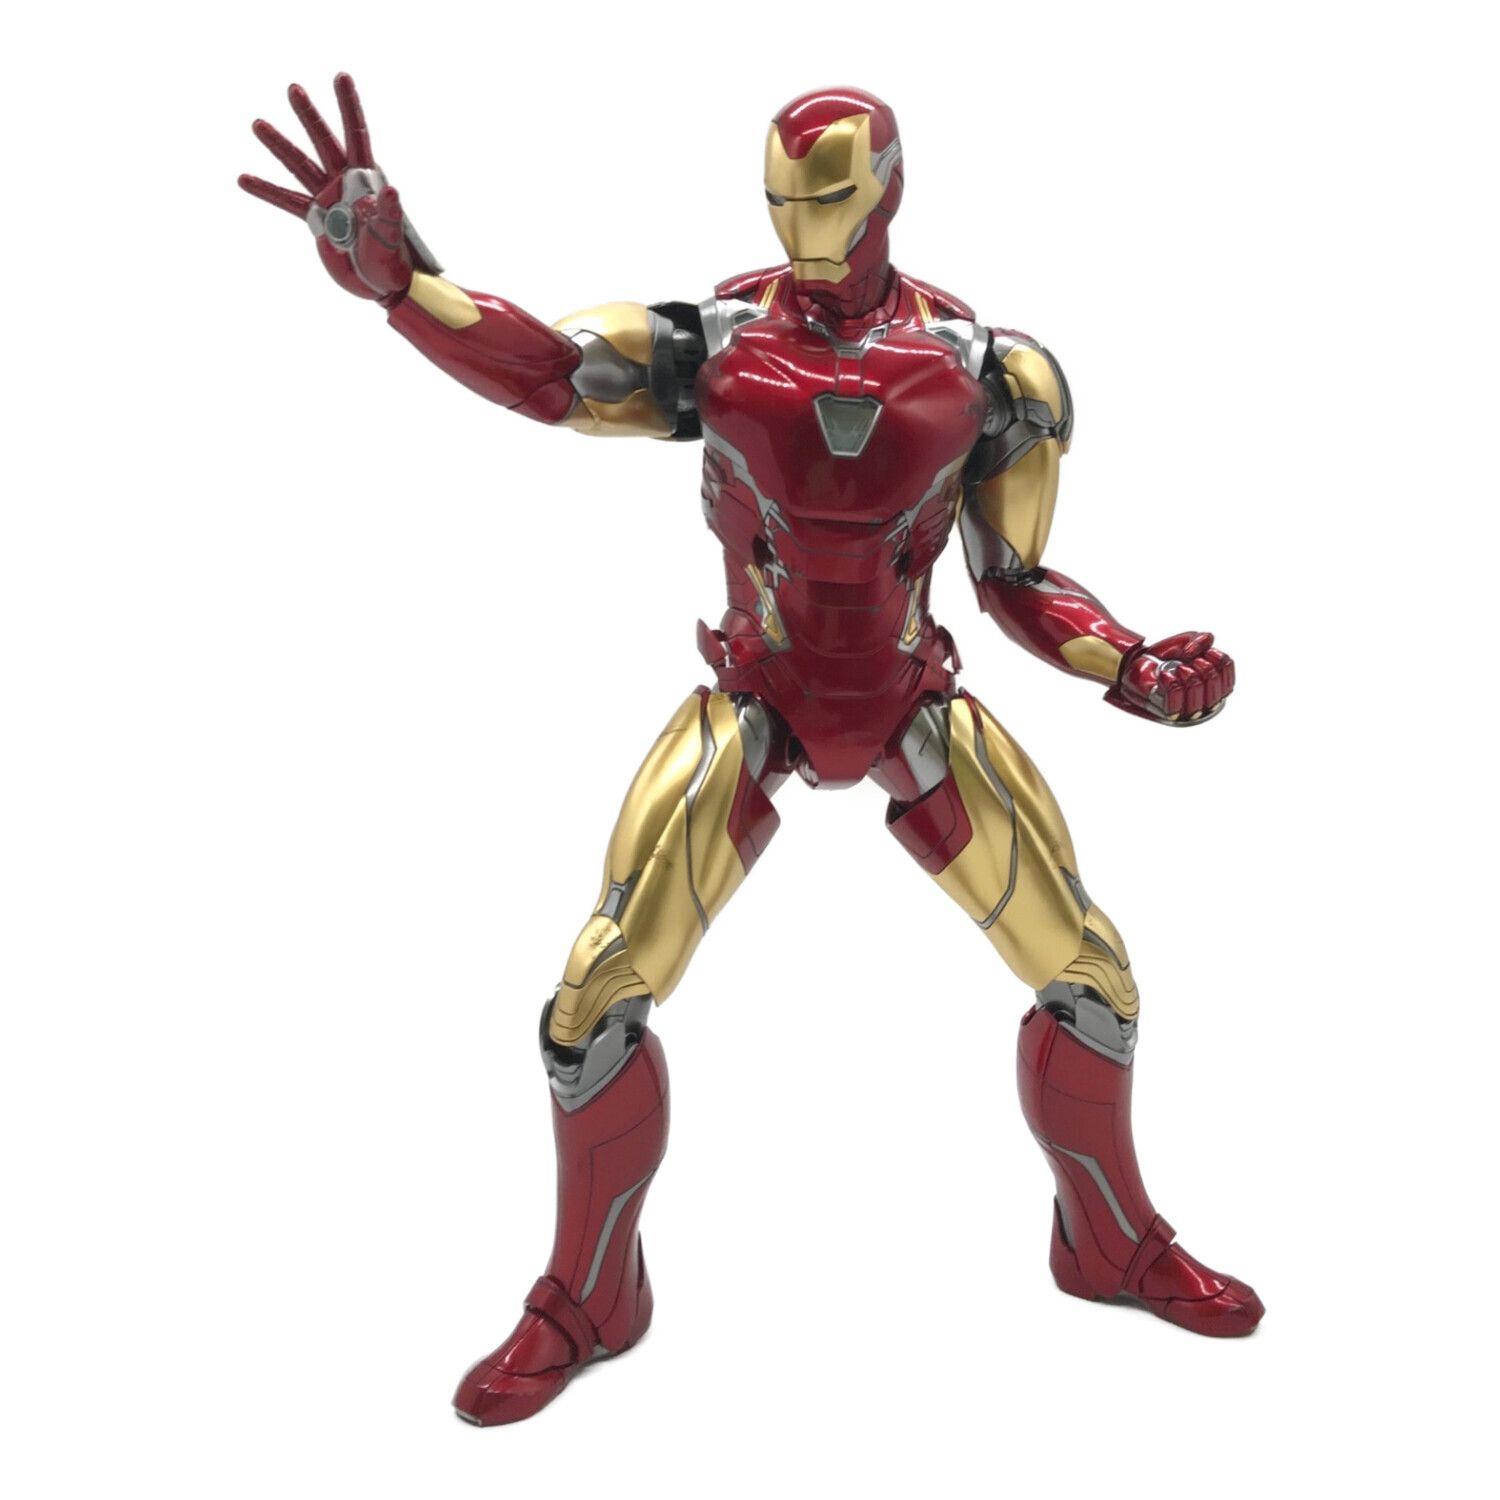 Hot toys (ホットトイズ) IRONMAN MARK VII MMS500-D27 1/6TH SCALE 